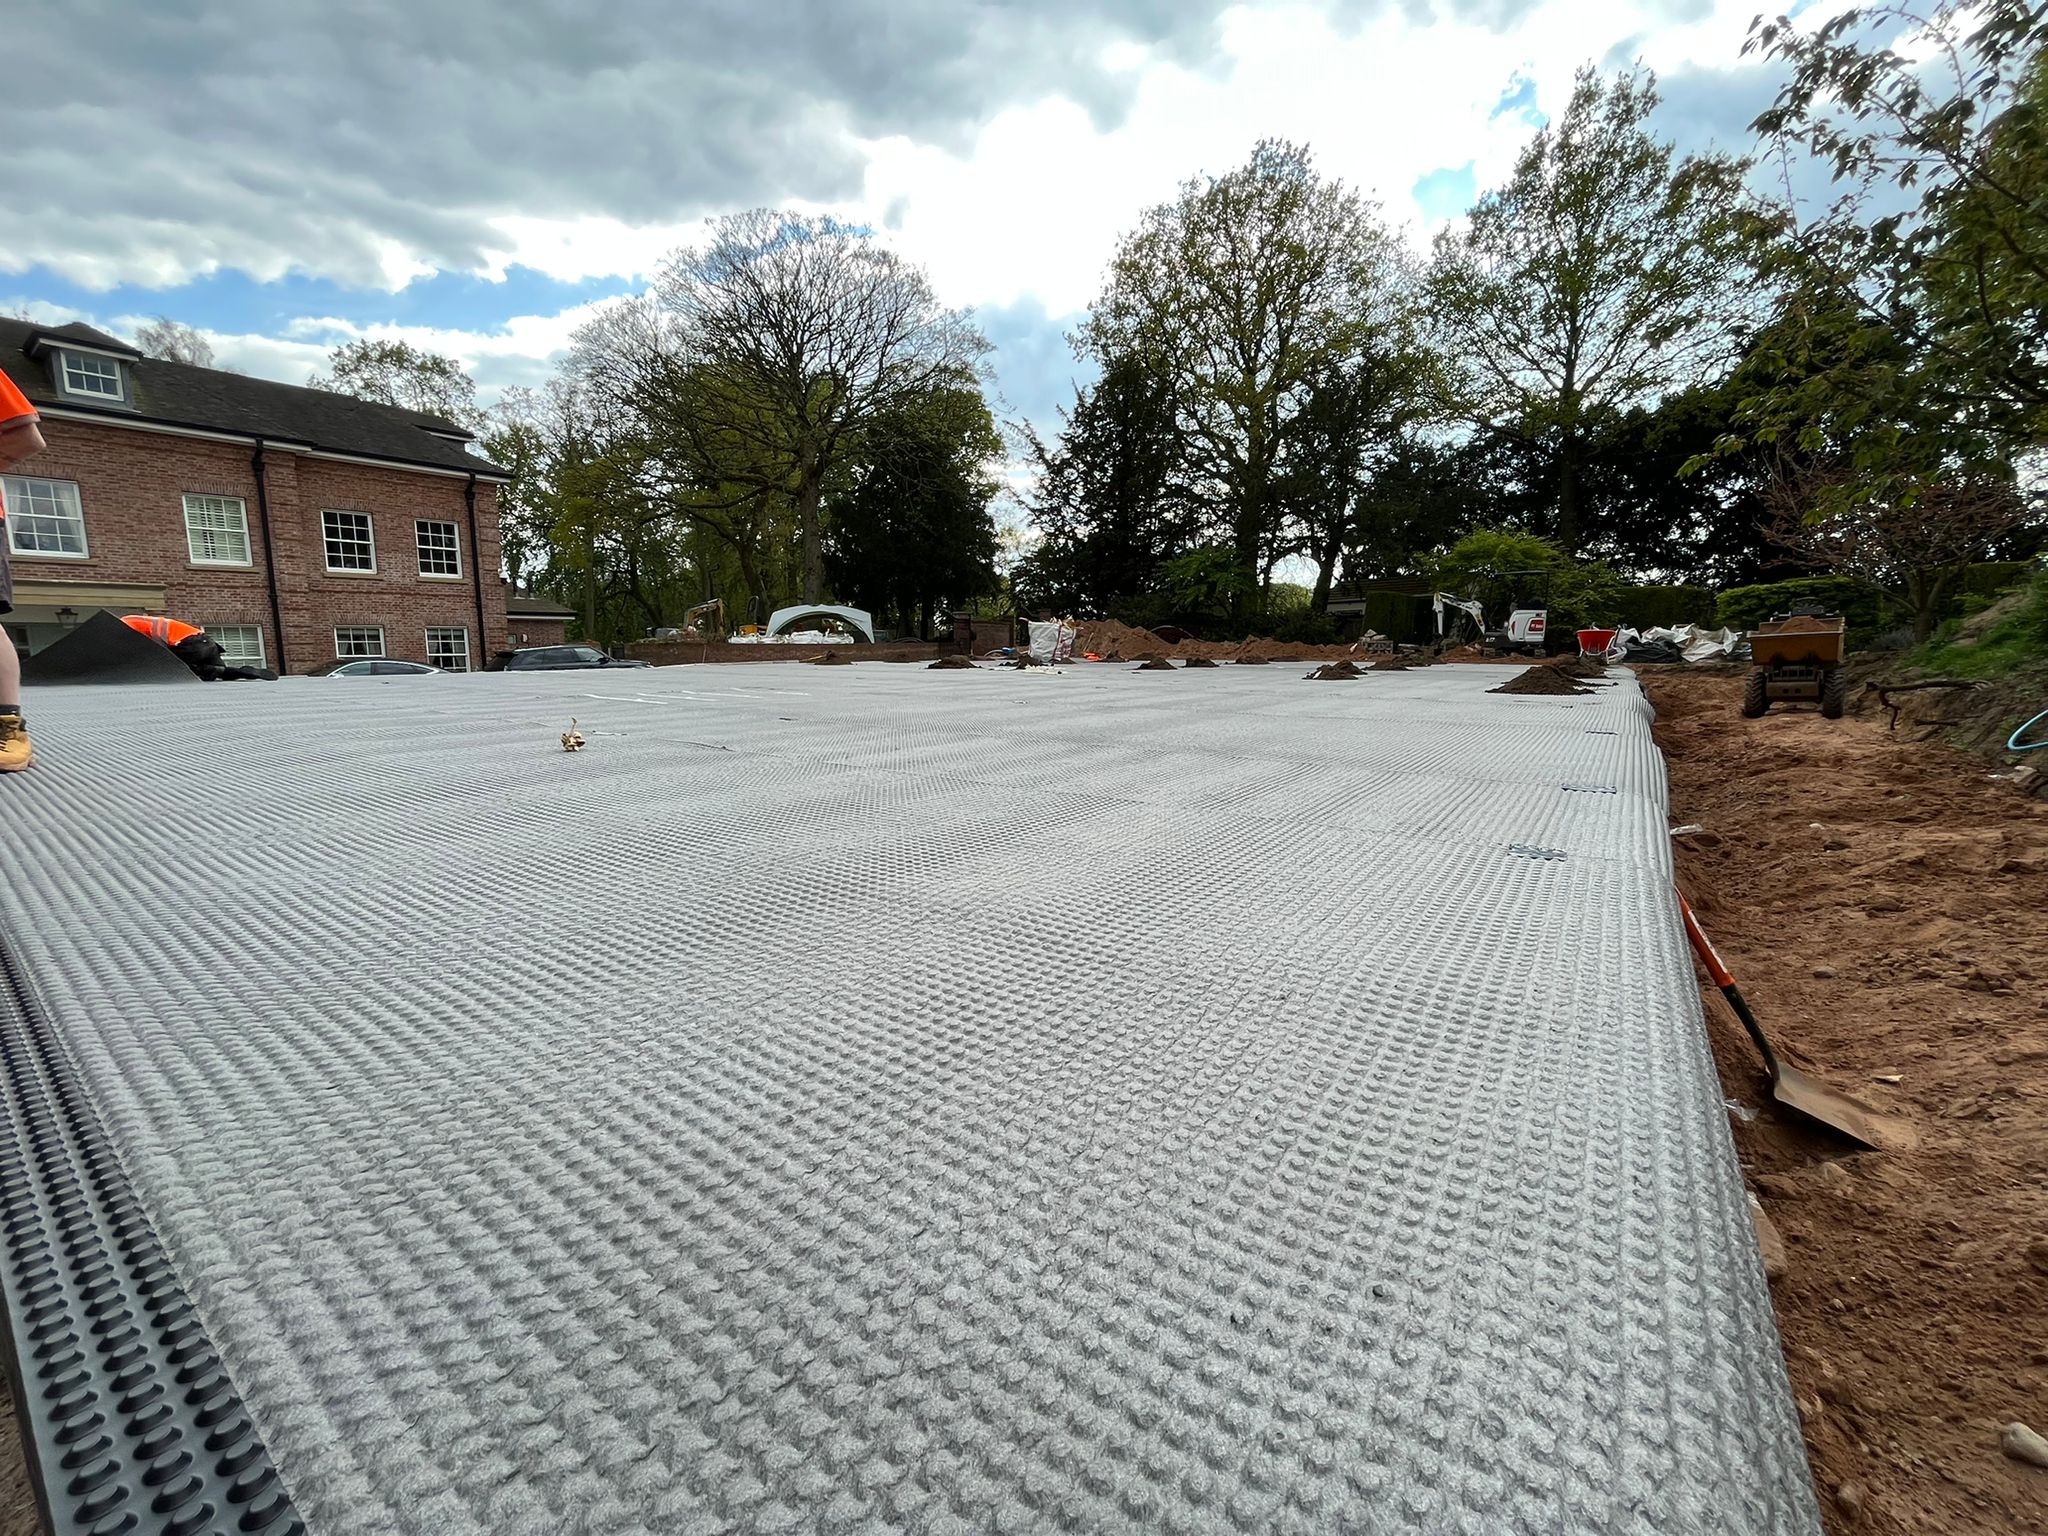 Wykamol geotextile drained cavity drain membranes get BBA certification